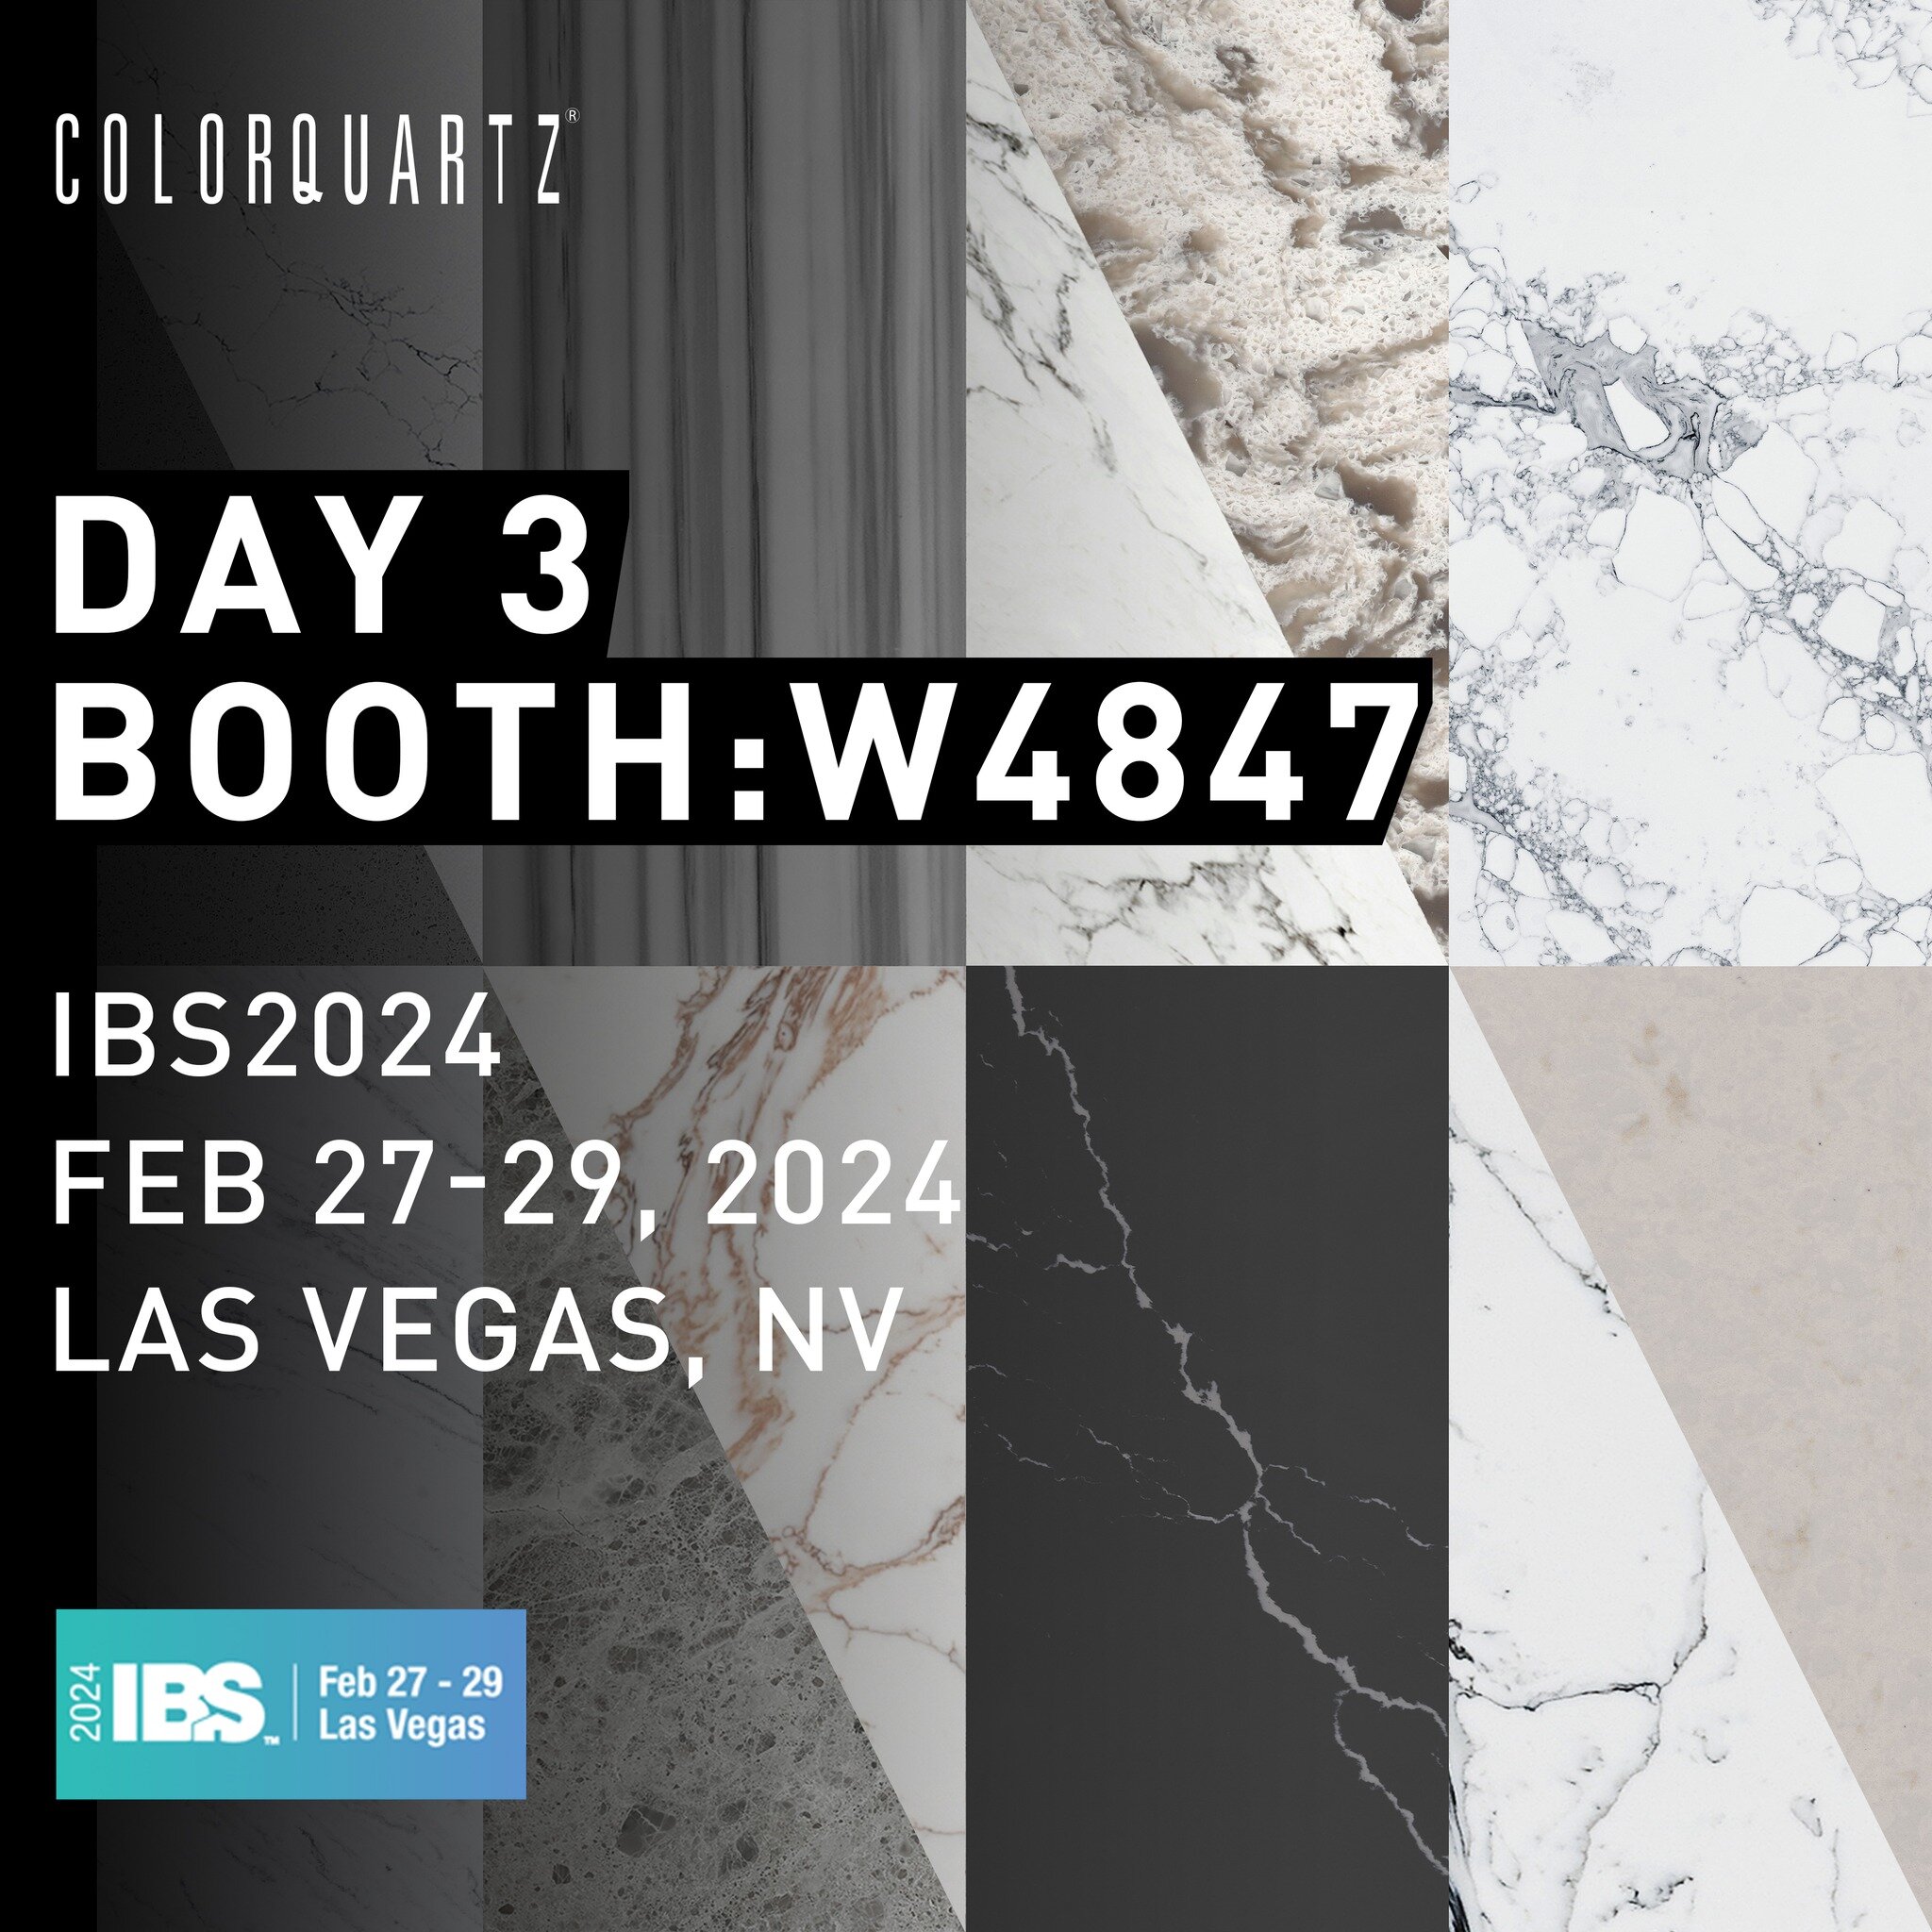 Day 3 of the International Builders' Show (IBS) 2024 is in full swing! Time flies when you're having fun discovering groundbreaking innovations! Join us at booth W4847 to wrap up this incredible event with a bang. Let's make the most of today and con